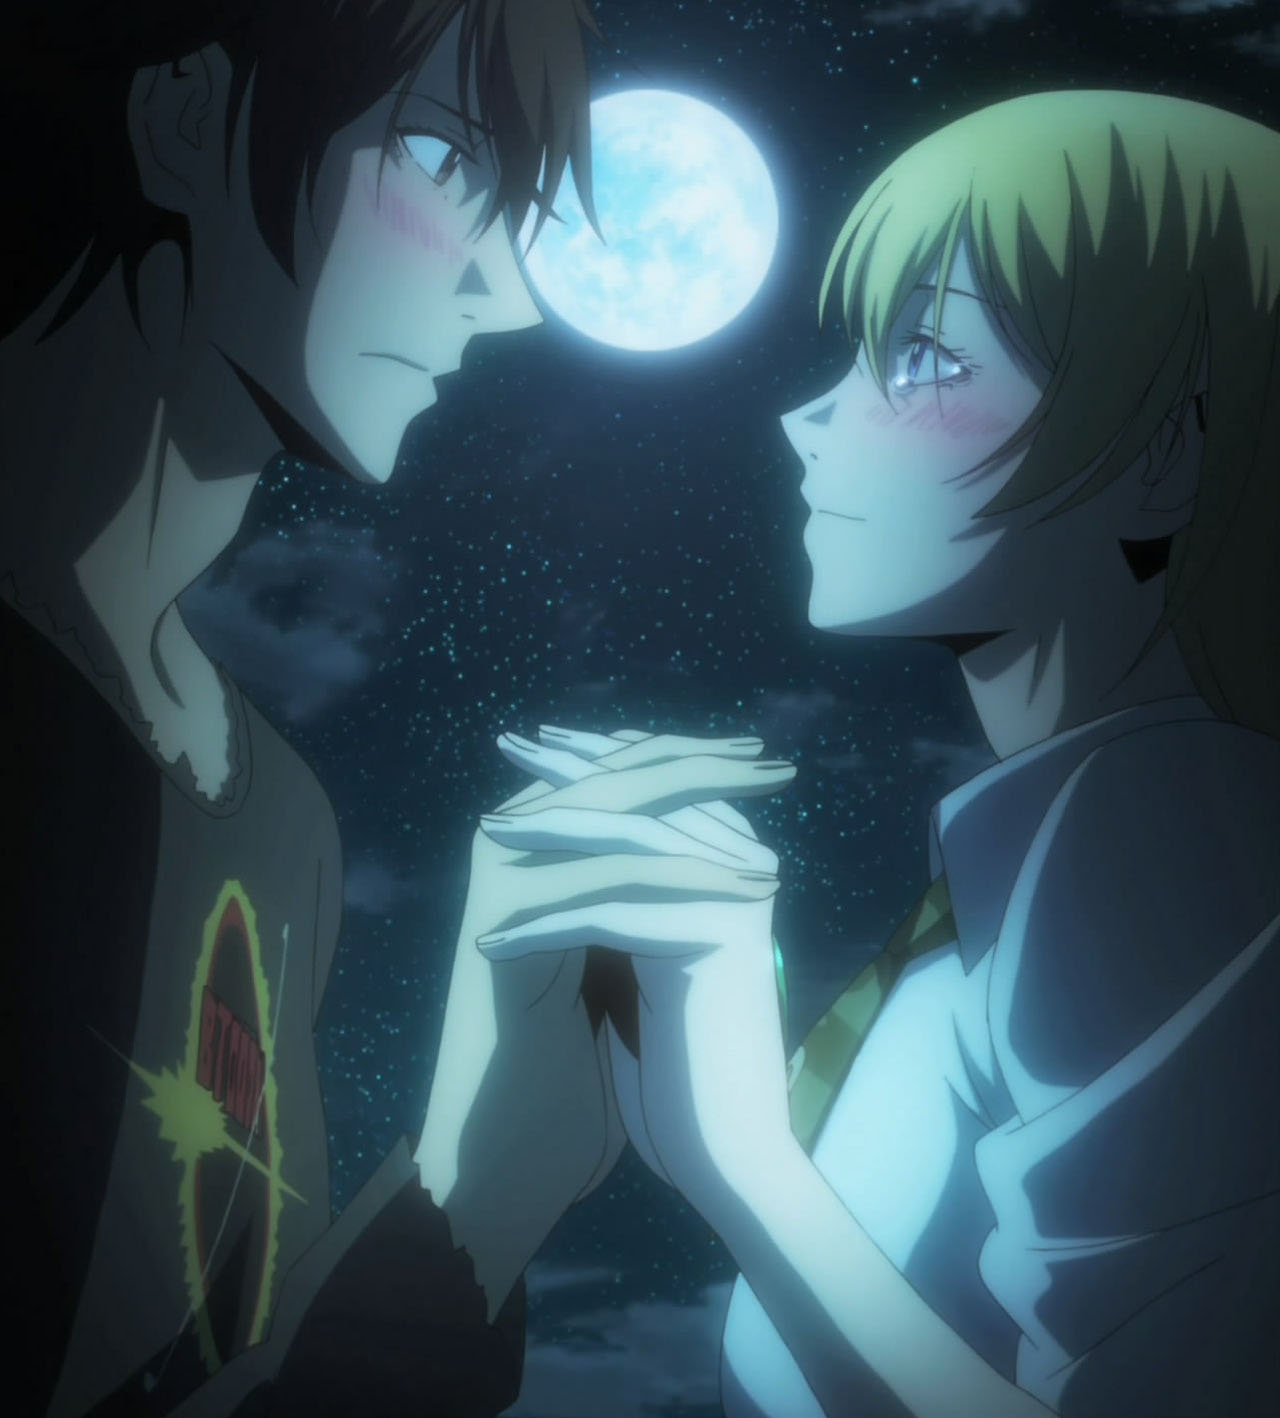 Btooom! Series Review | Lair of the Idle